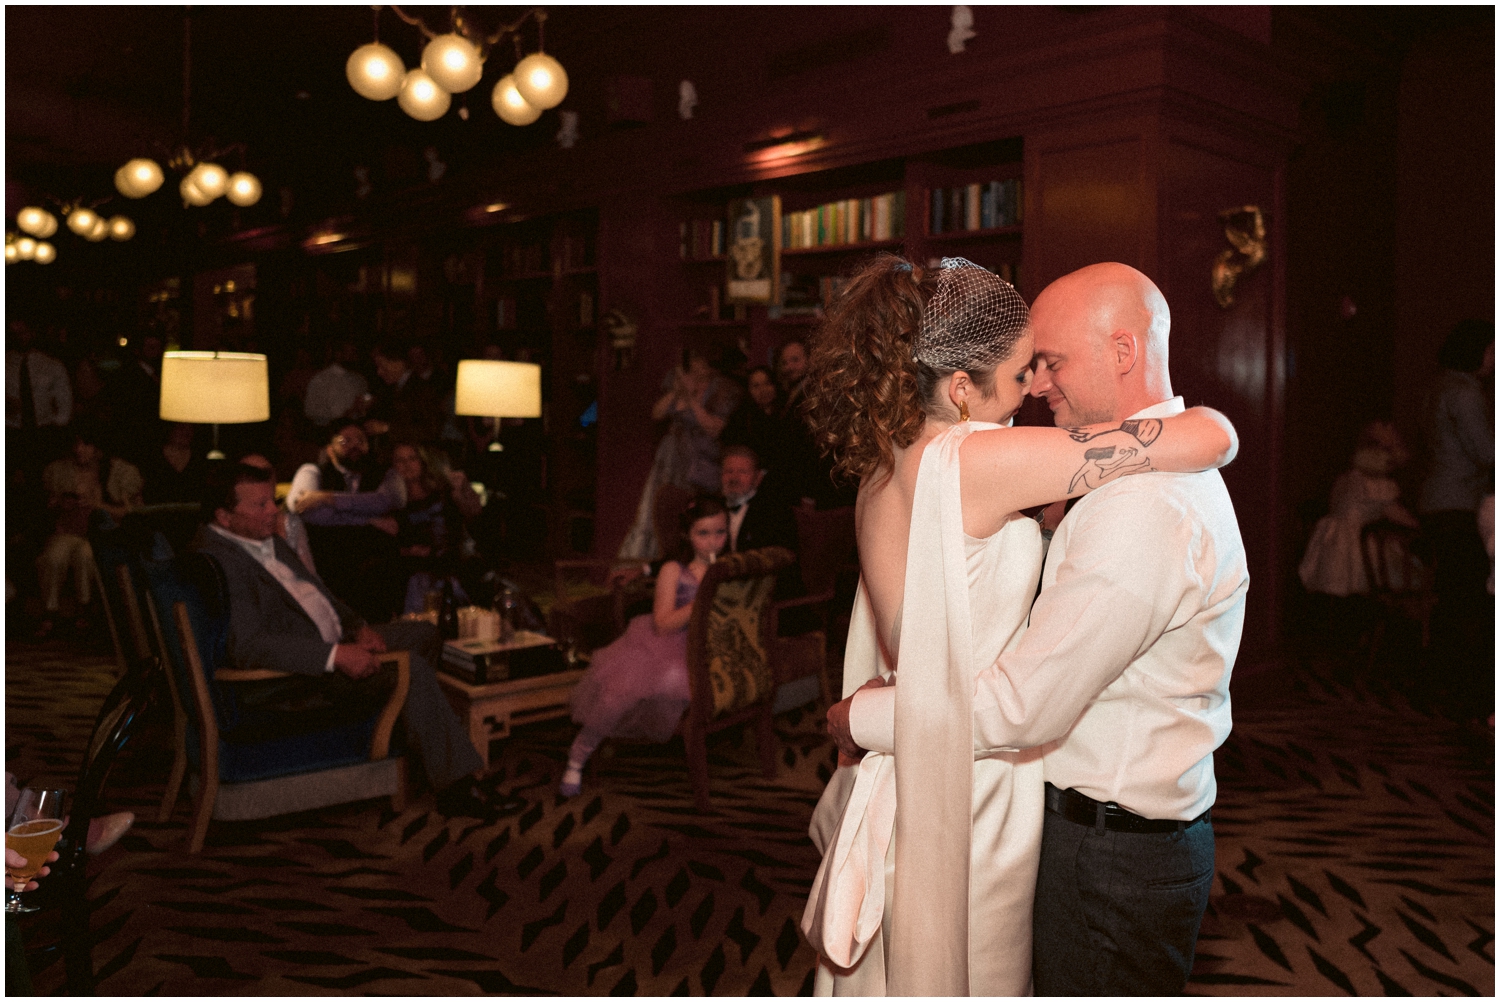 A couple has their first dance at their speakeasy wedding at Bar Marilou.